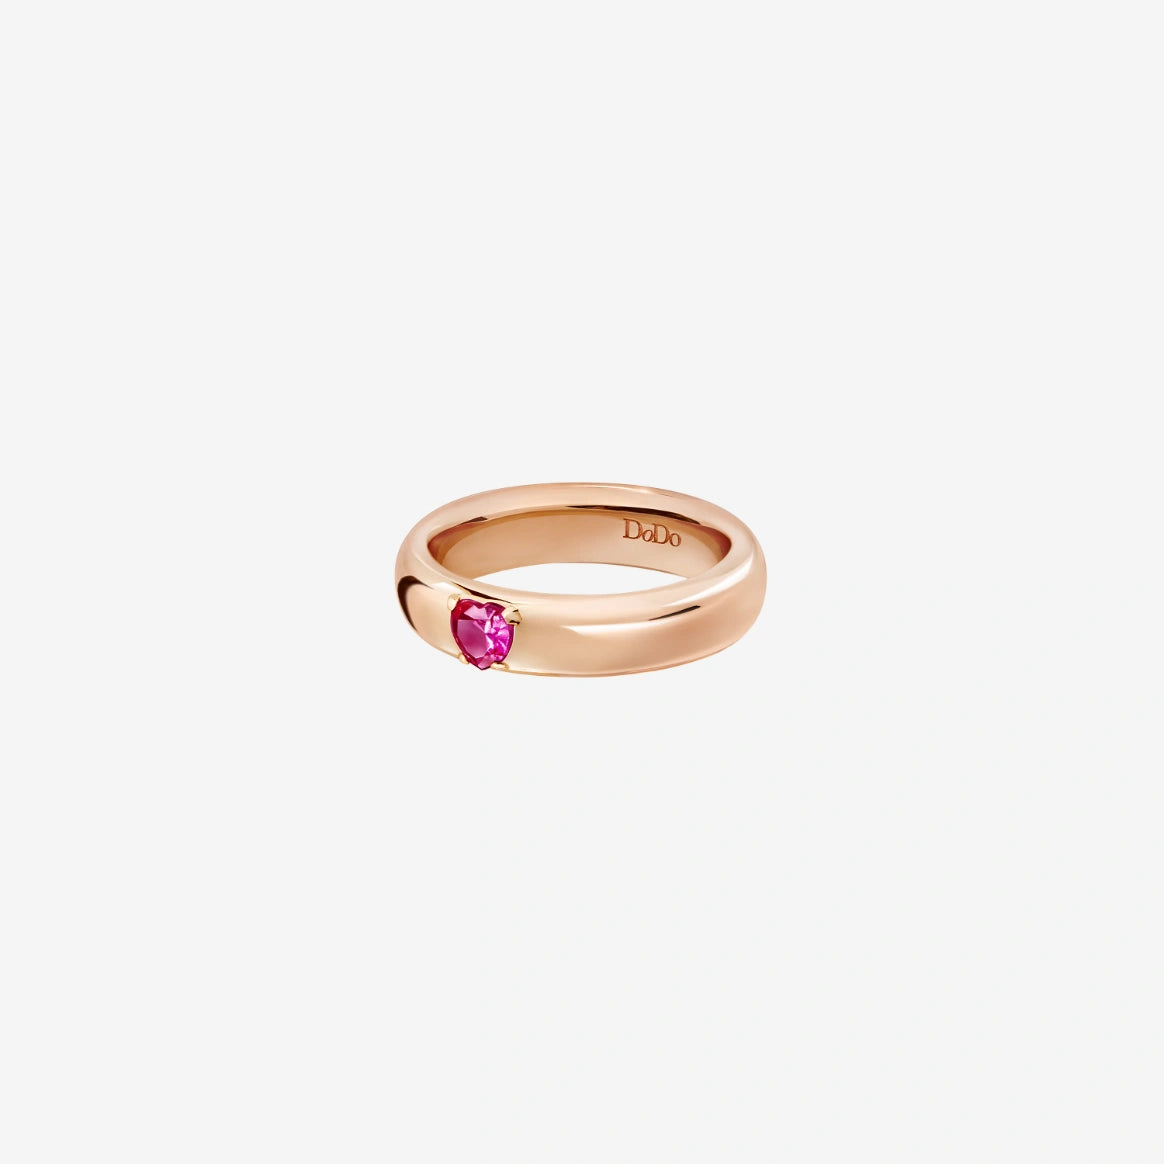 DoDo Heart Ring in 9K Rose Gold and Pink Heart Synthetic Ruby - Orsini Jewellers